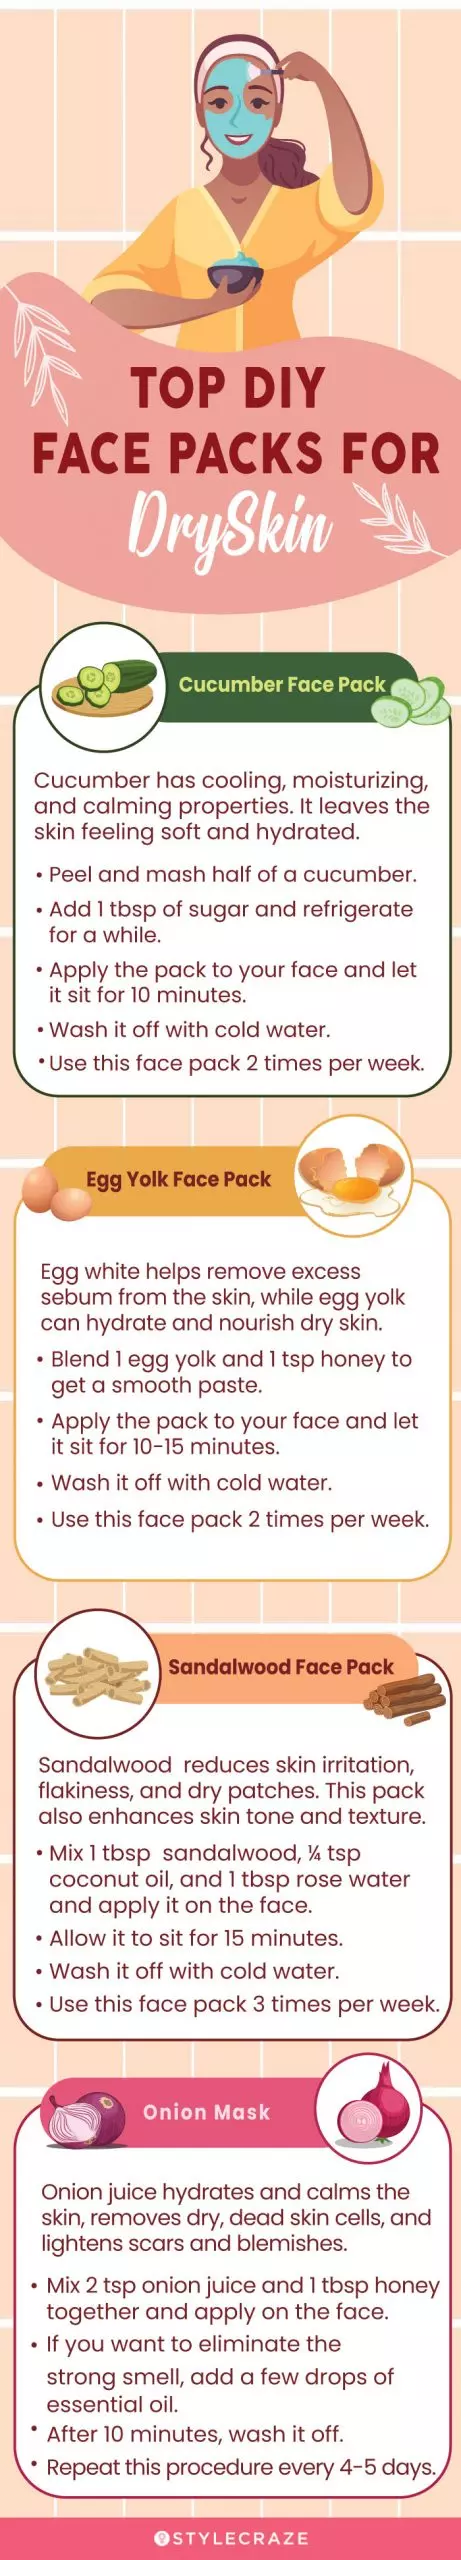 top diy face packs for dry skin (infographic)